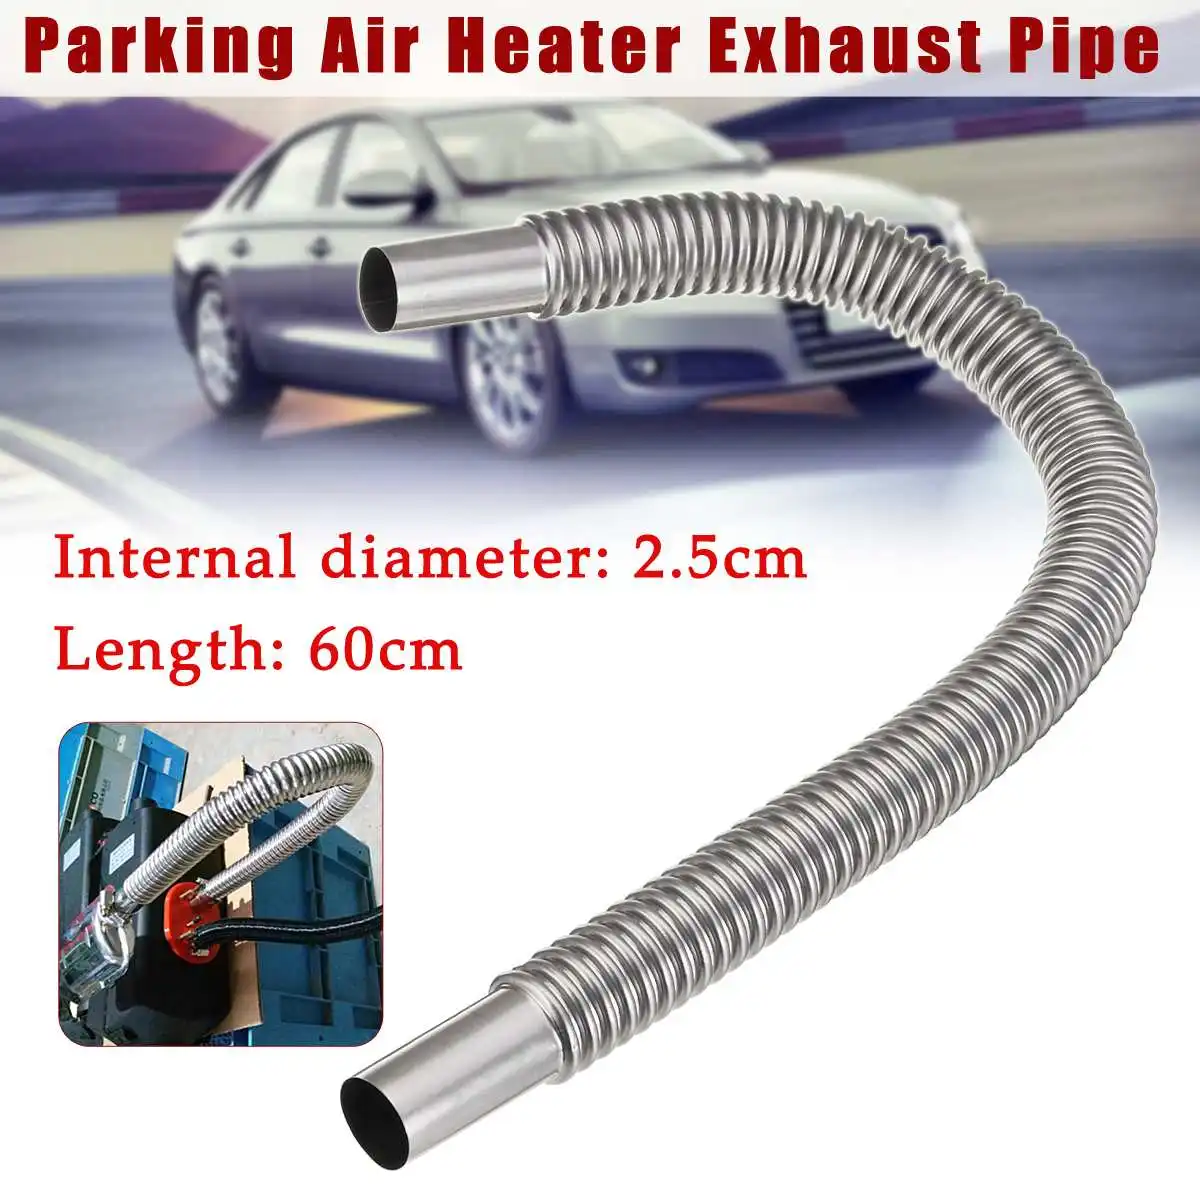 Stainless Steel Exhaust Pipe 2.5cm Parking Heater Fuel Tank Exhaust Pipe Car Air Heater Tank Diesel Gas Vent Hose 